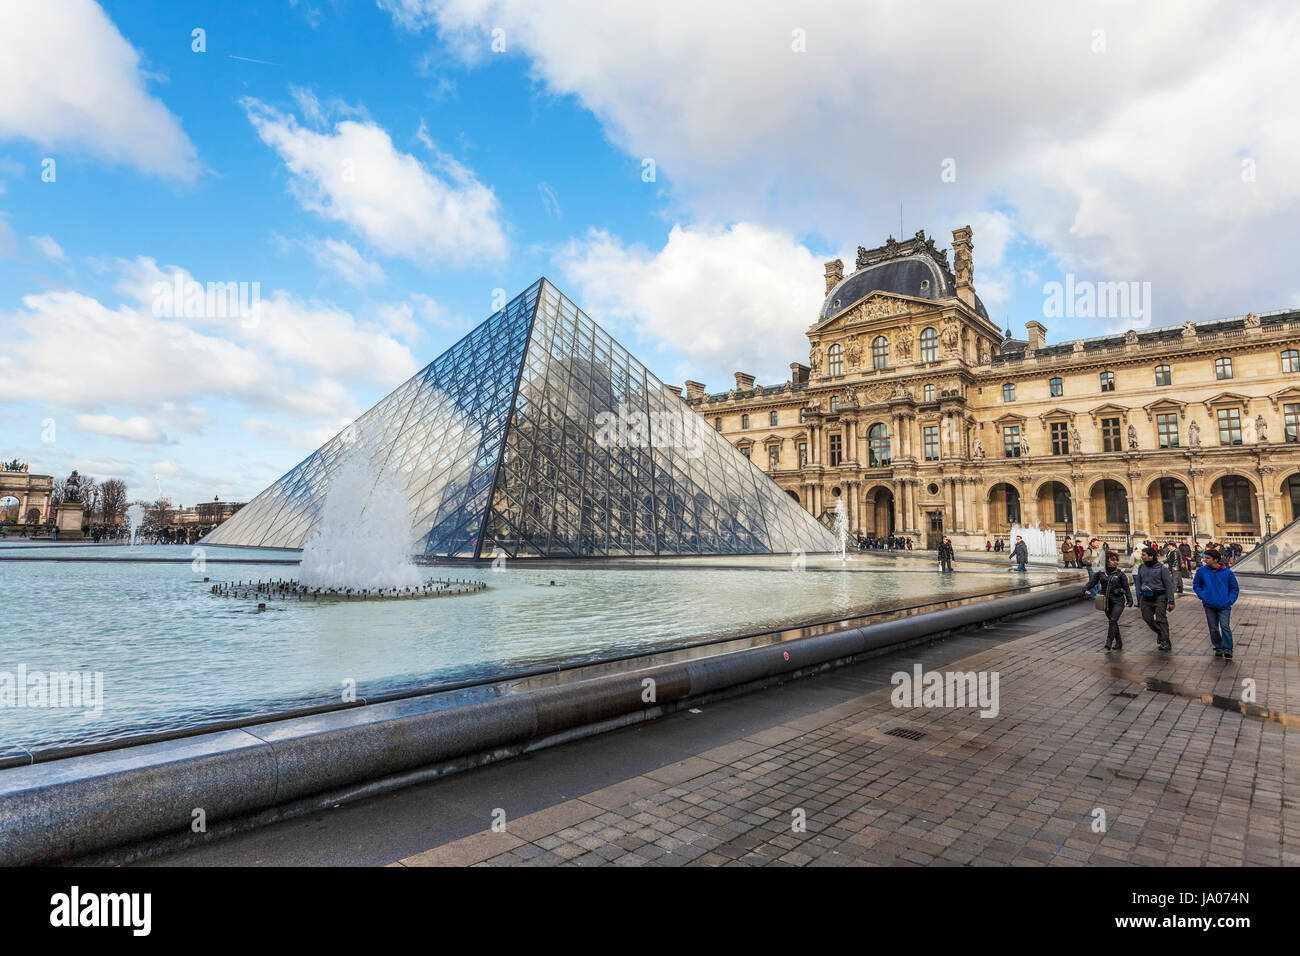 The Louvre Palace, art gallery, Museum and Louvre Pyramid (Pyramide du ...